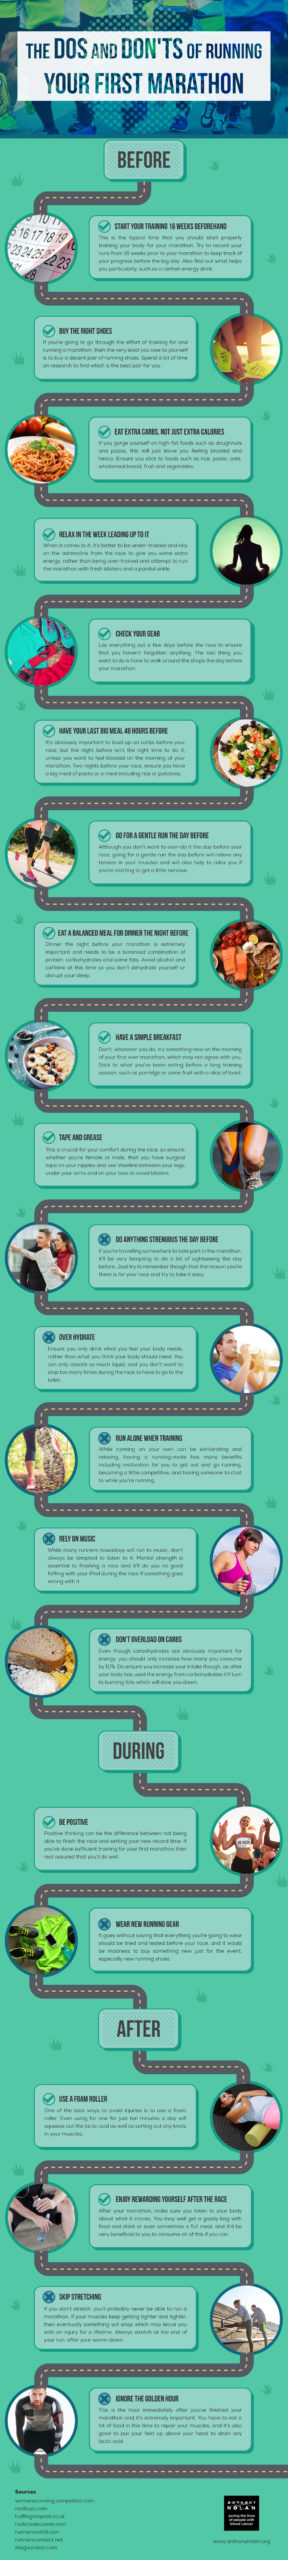 The Dos And Don’ts Of Running Your First Marathon [Infographic]